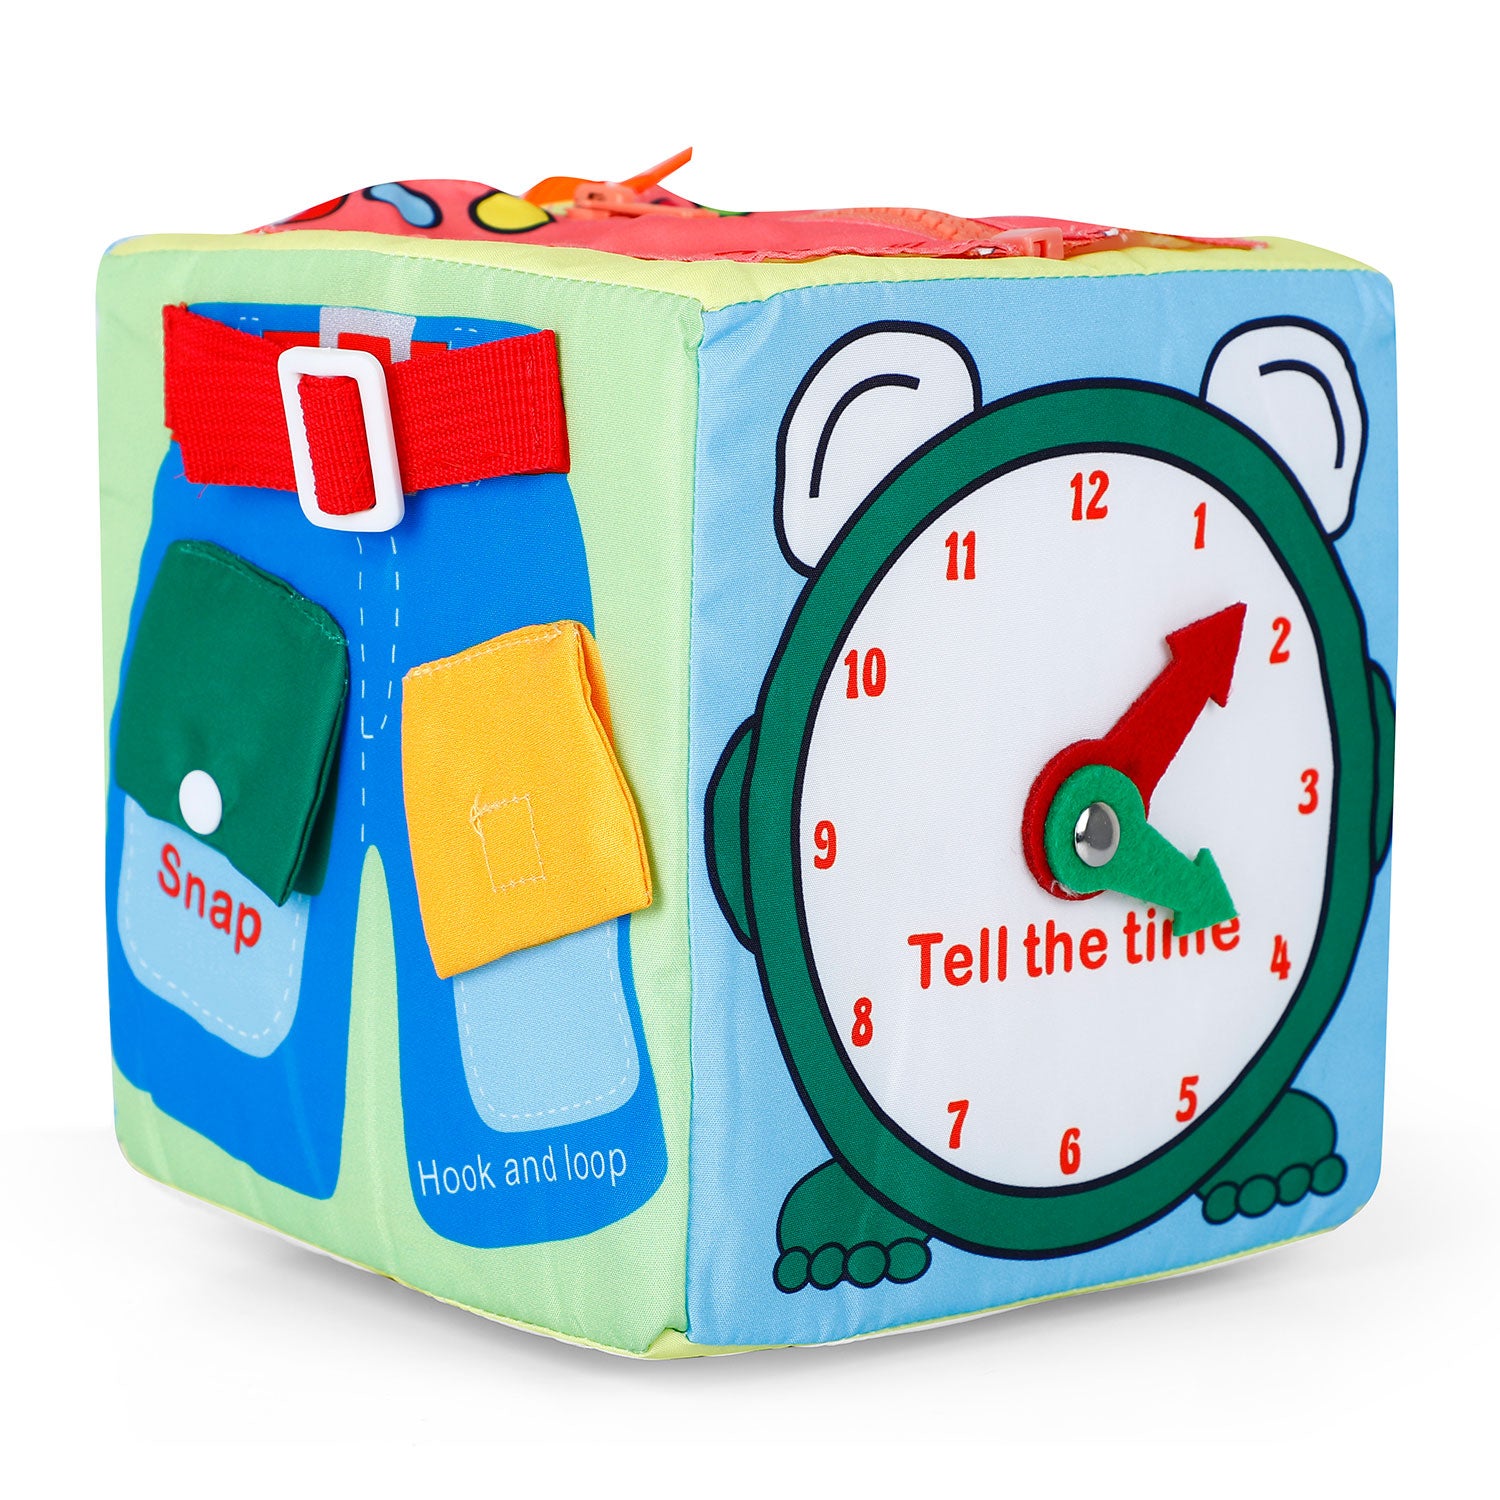 Baby Moo All In One Activity Cube 6 Side Play Educational Toy - Multicolour